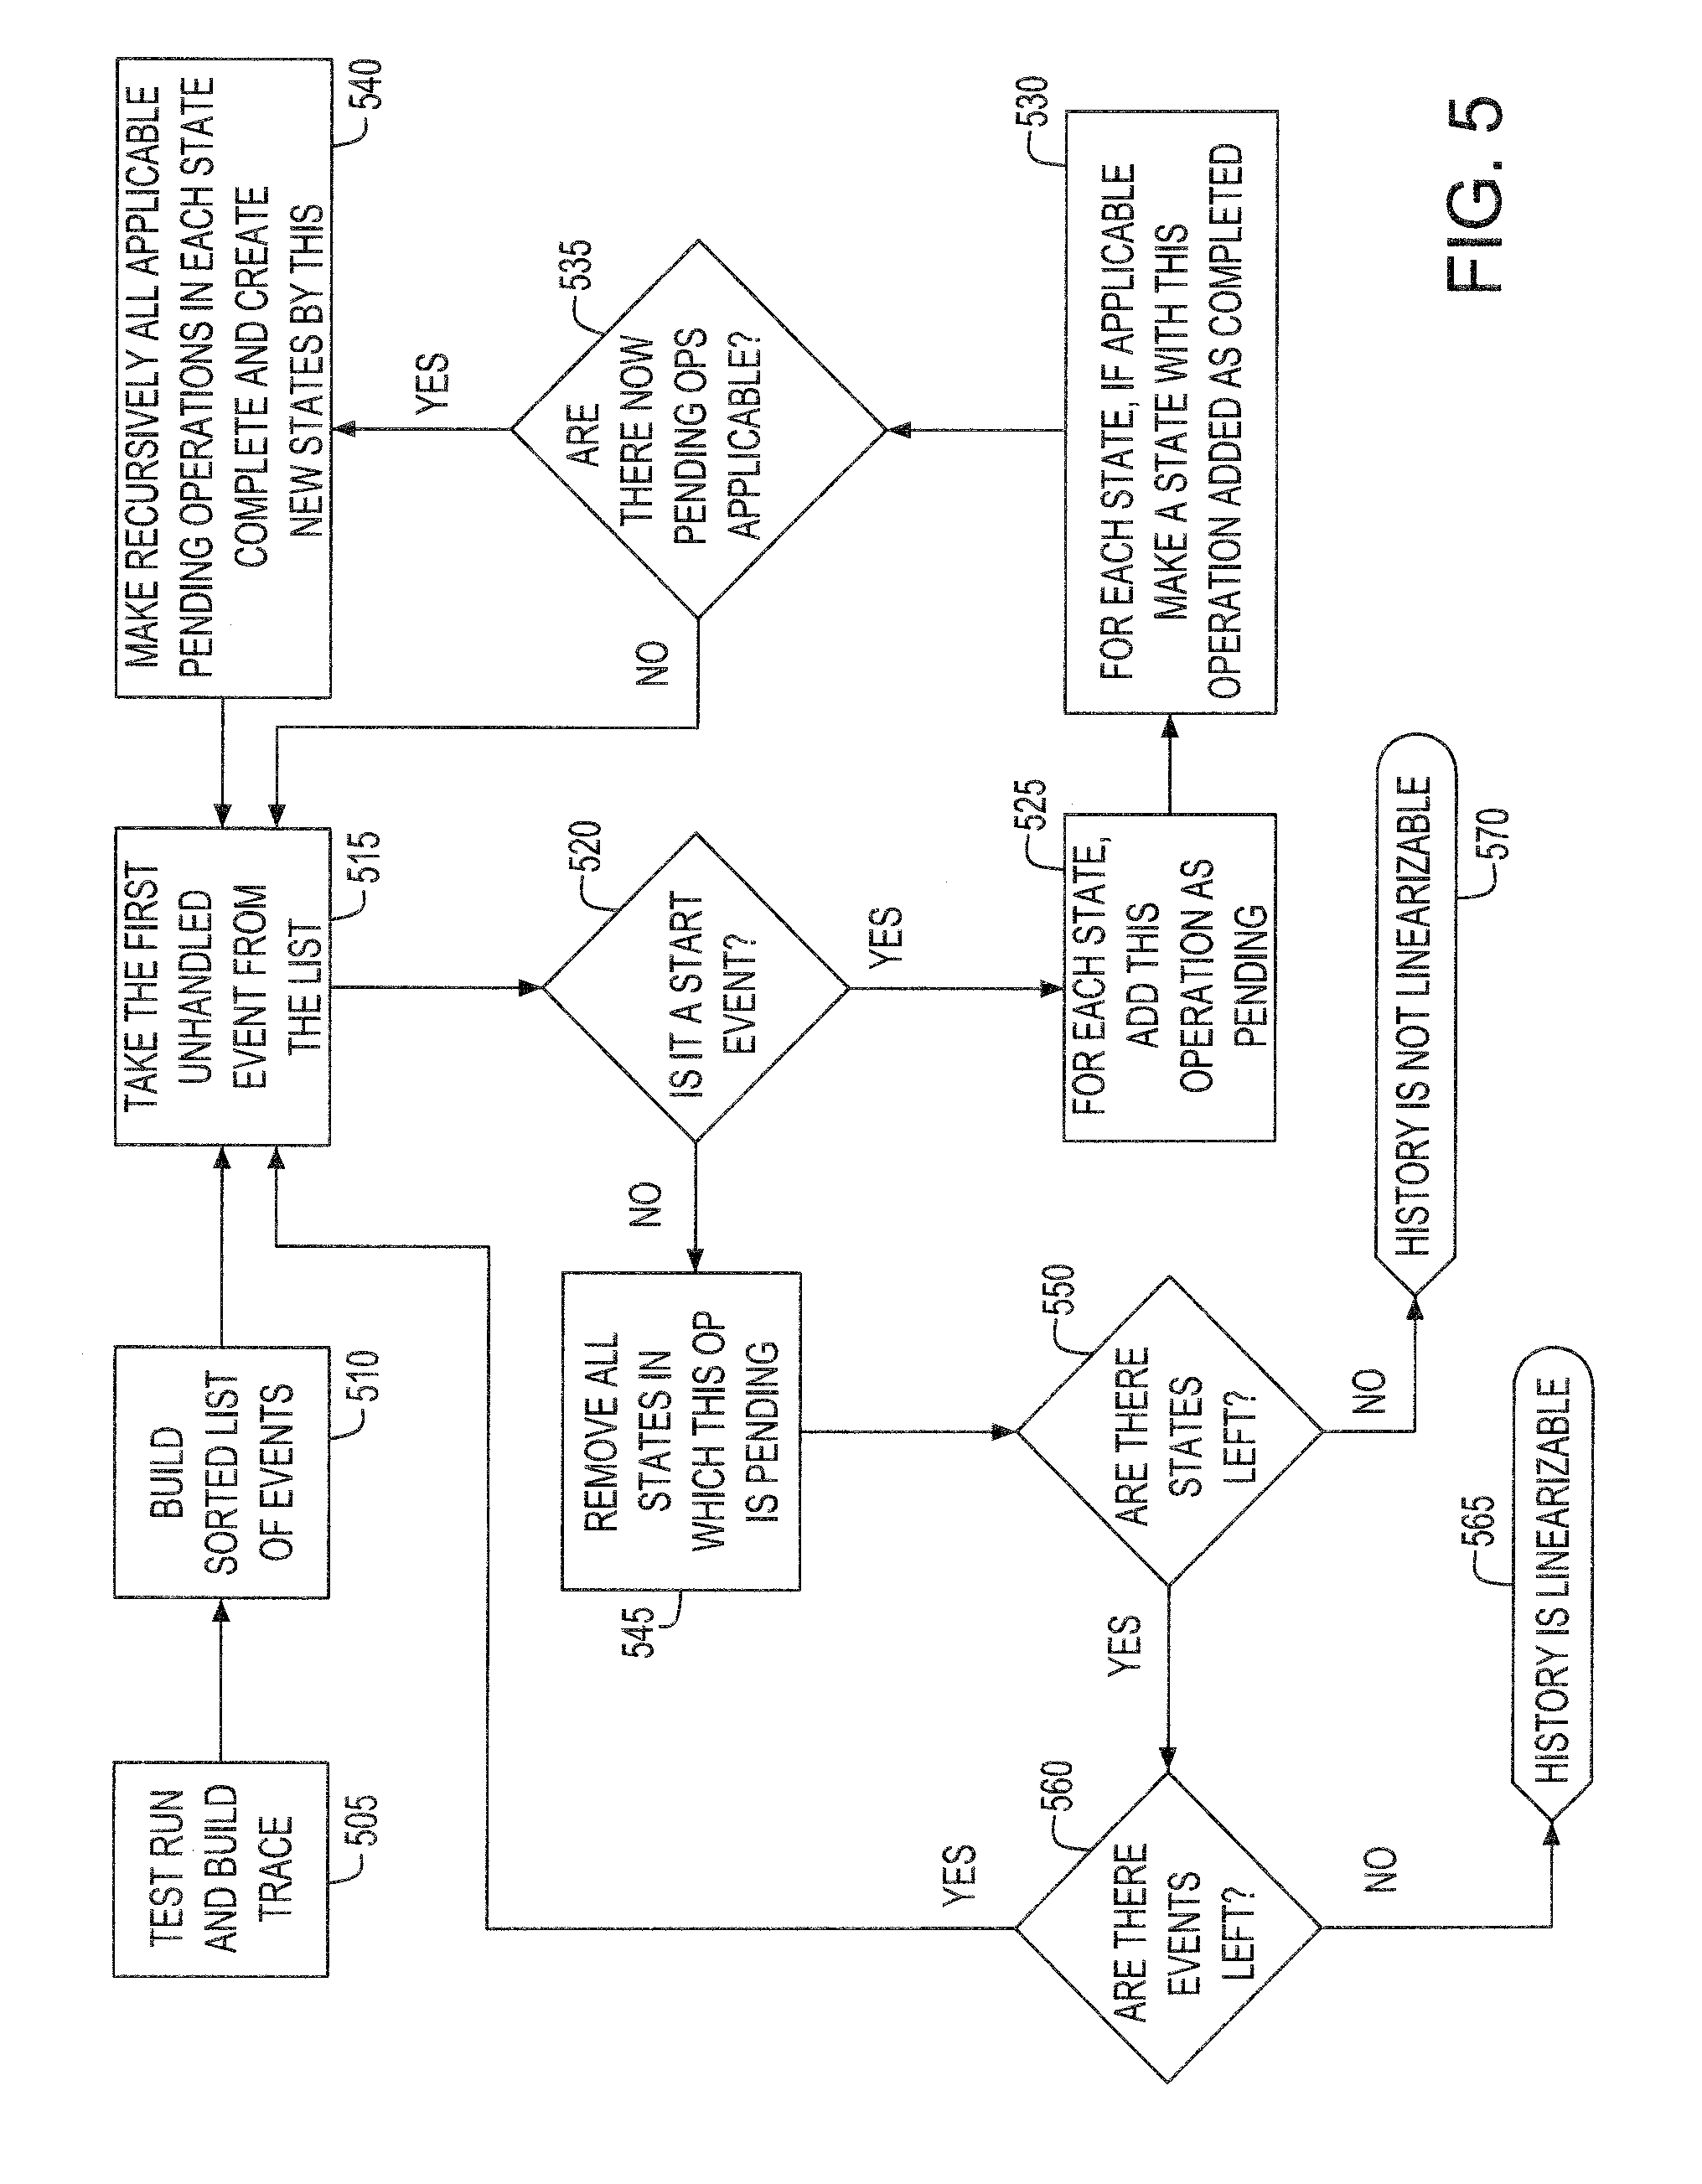 System and method for demonstrating the correctness of an execution trace in concurrent processing environments